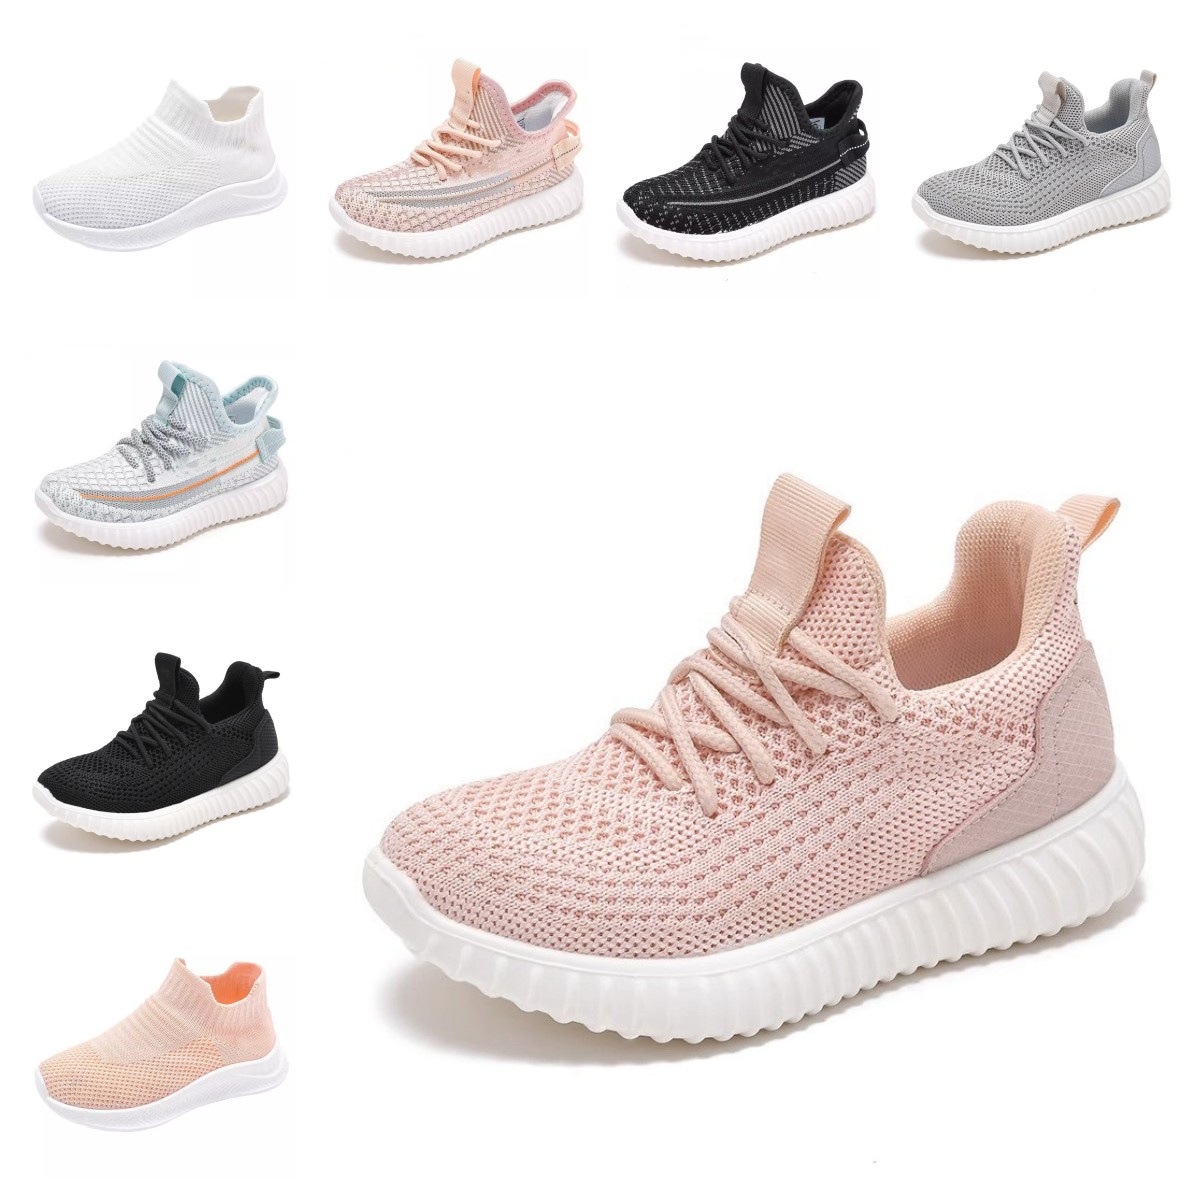 

2023 Tennis Children Lightweight Casual Shoes for Baby Girls Kids Boys Rubber Bottom Antiskid Outdoor Gym Mesh Breathable Sneakers baby outdoor walking 26-35 bb036, Color 01